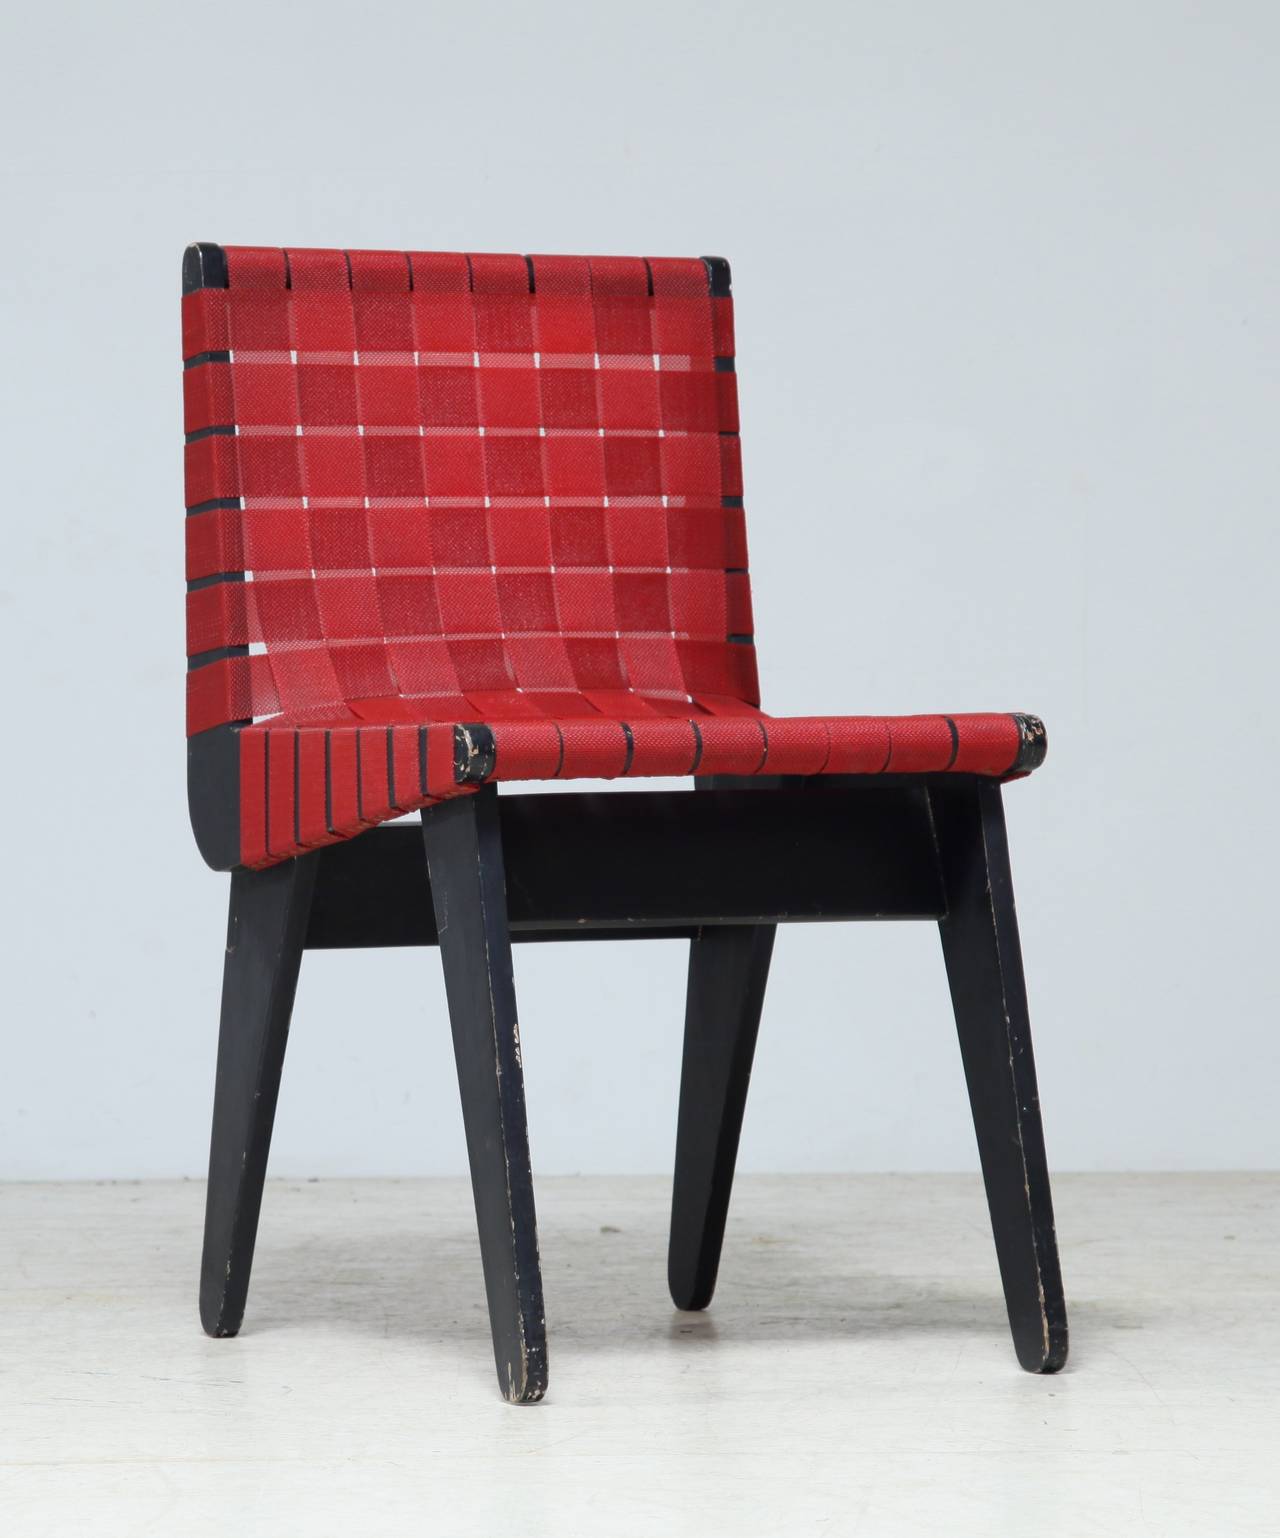 American Klaus Grabe Chair with Red Webbing, USA, 1950s For Sale